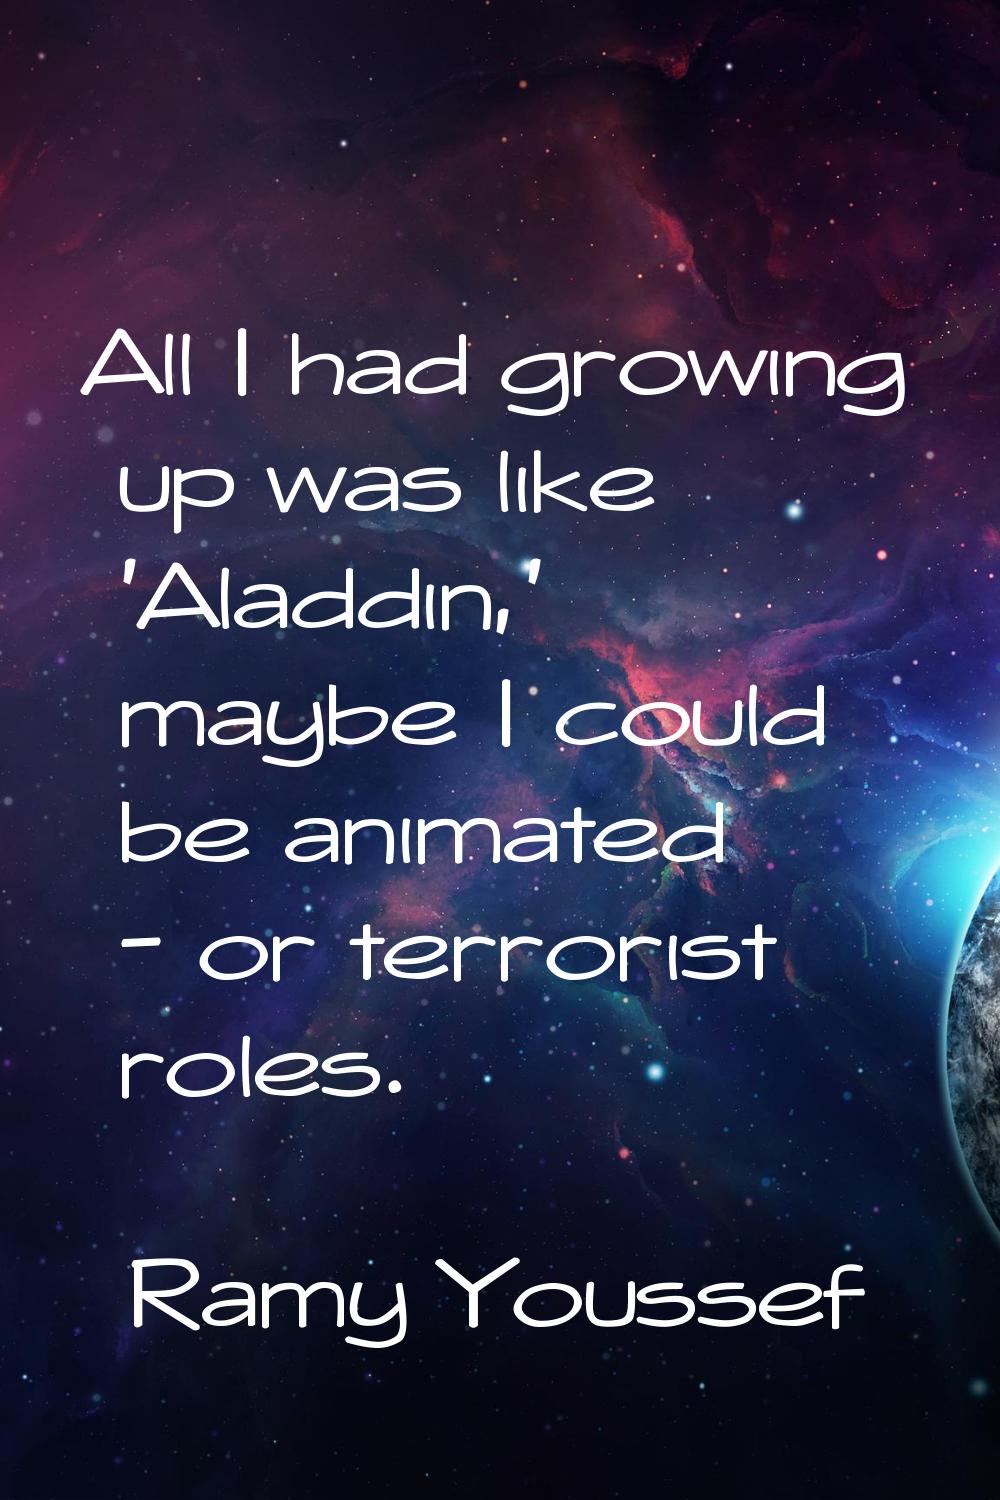 All I had growing up was like 'Aladdin,' maybe I could be animated - or terrorist roles.